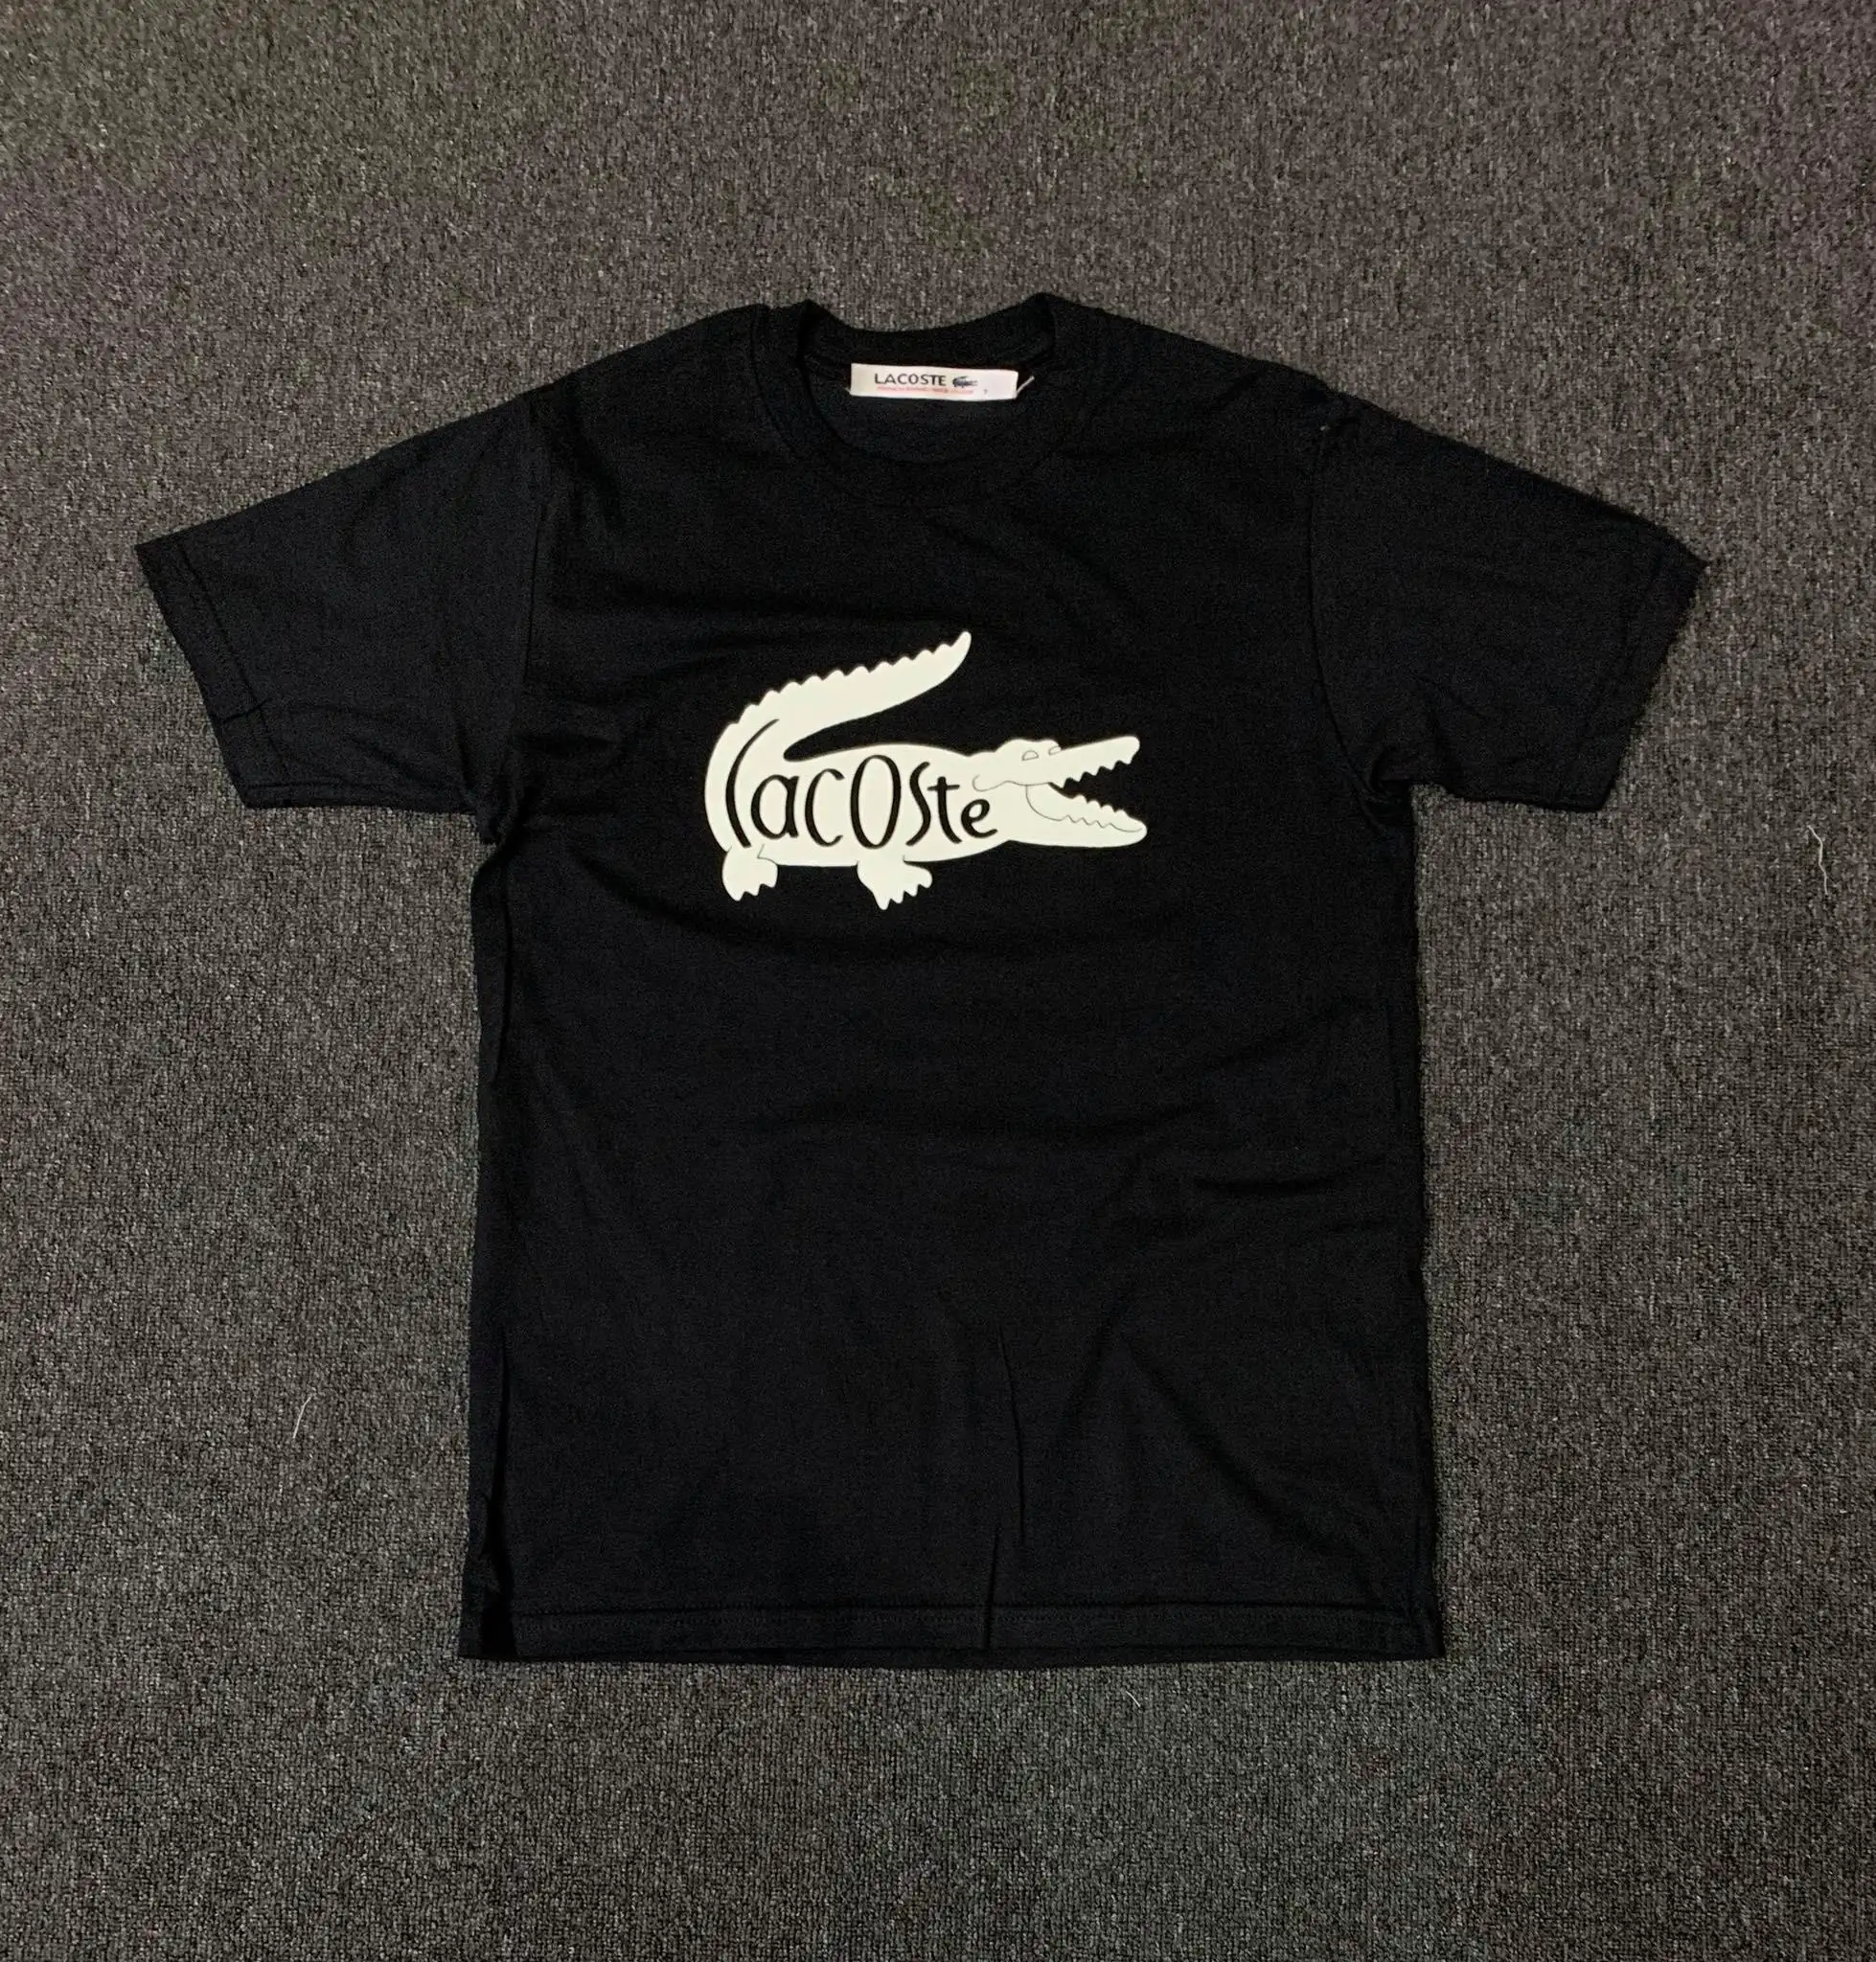 Lacoste Printed T Shirt Word 1 Glow 